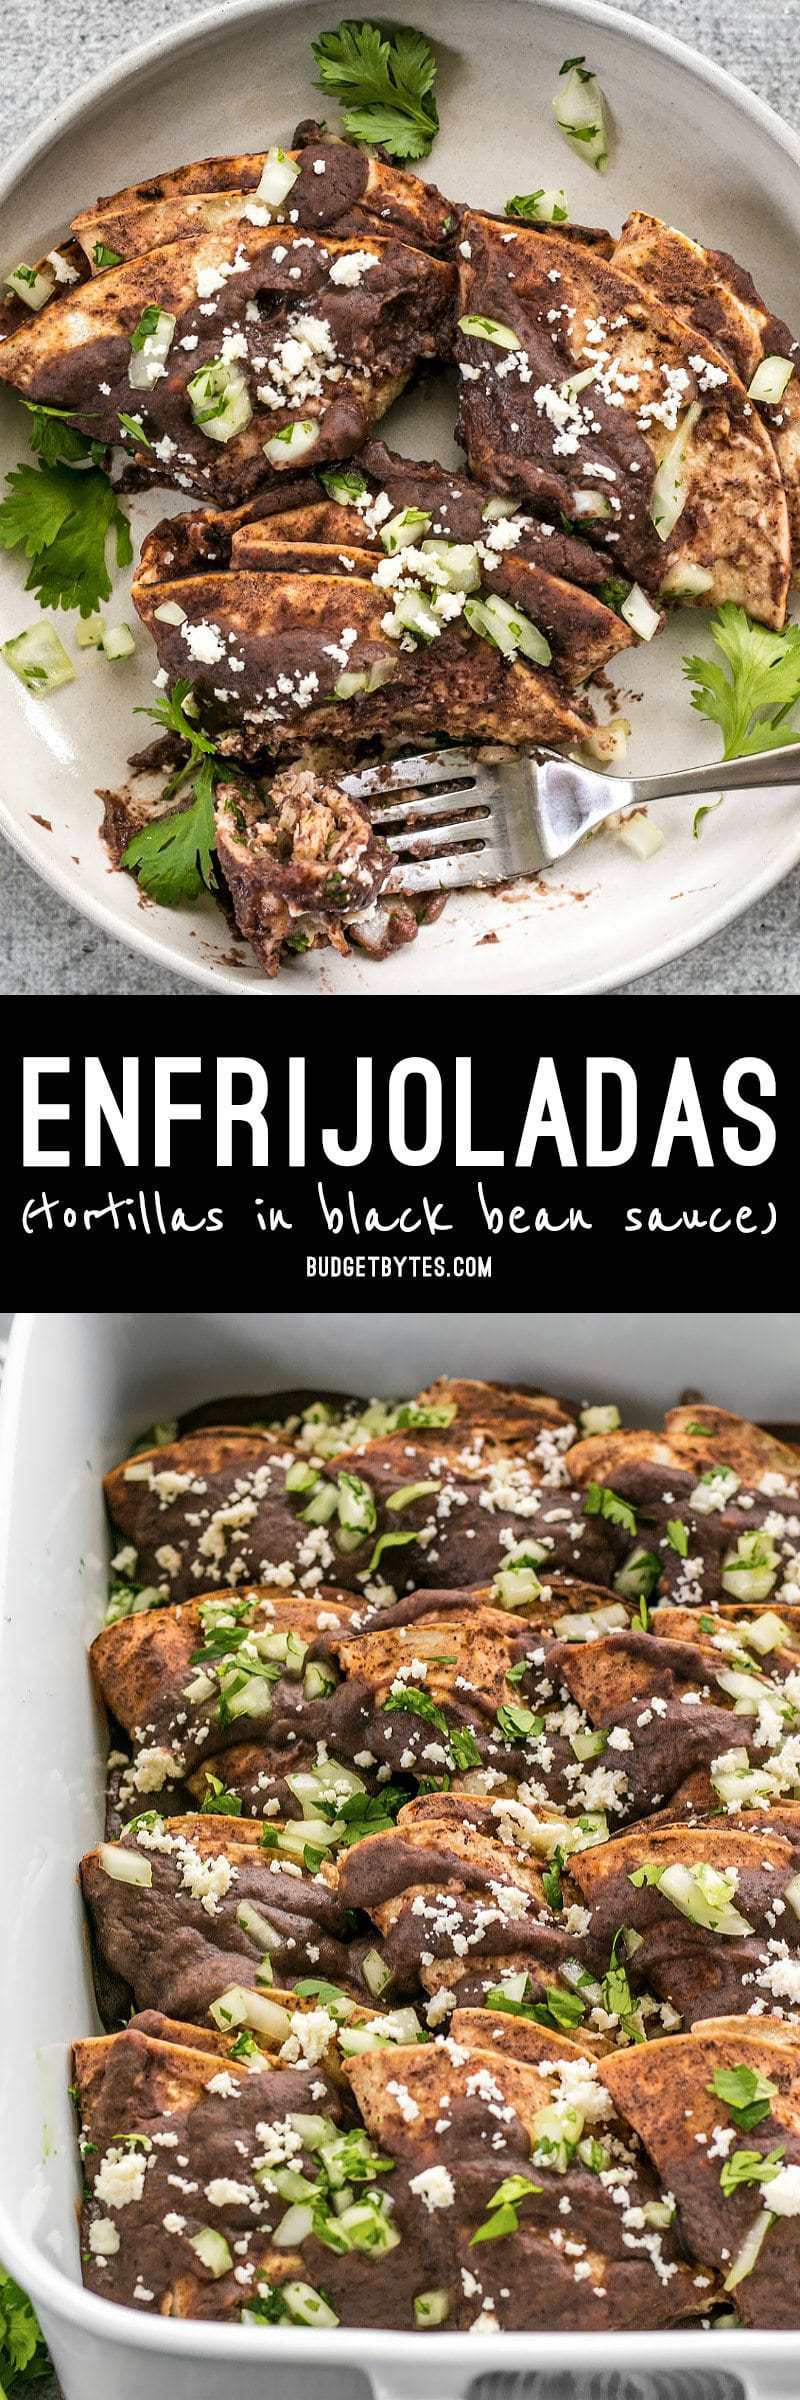 Enfrijoladas are an easy, flavorful, and customizable recipe based on corn tortillas drenched in a spicy black bean sauce. BudgetBytes.com